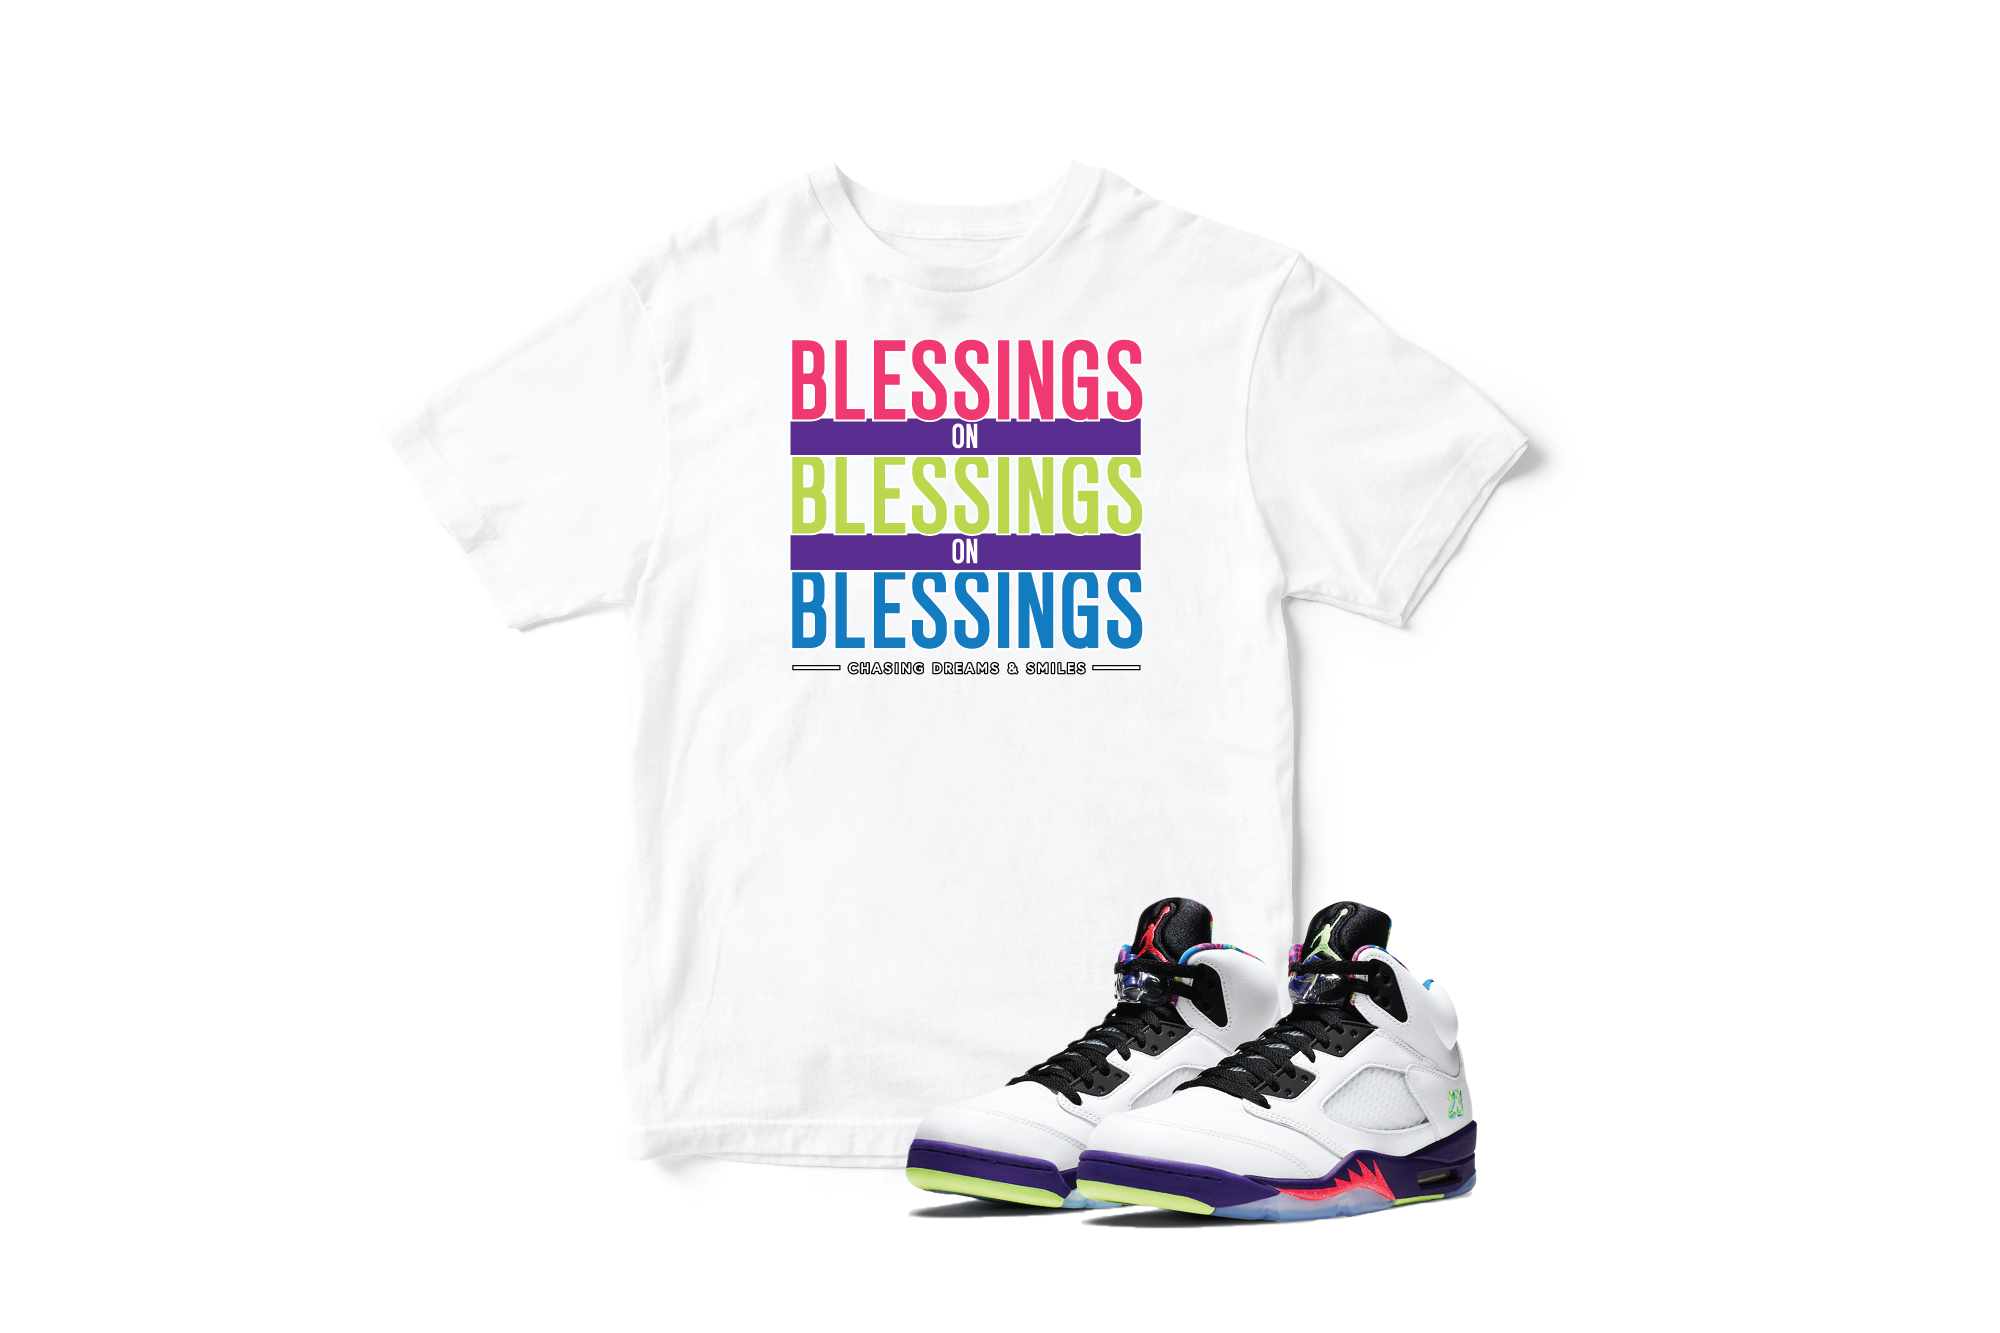 'Blessings On Blessings' in Ghost Green CW Short Sleeve Tee